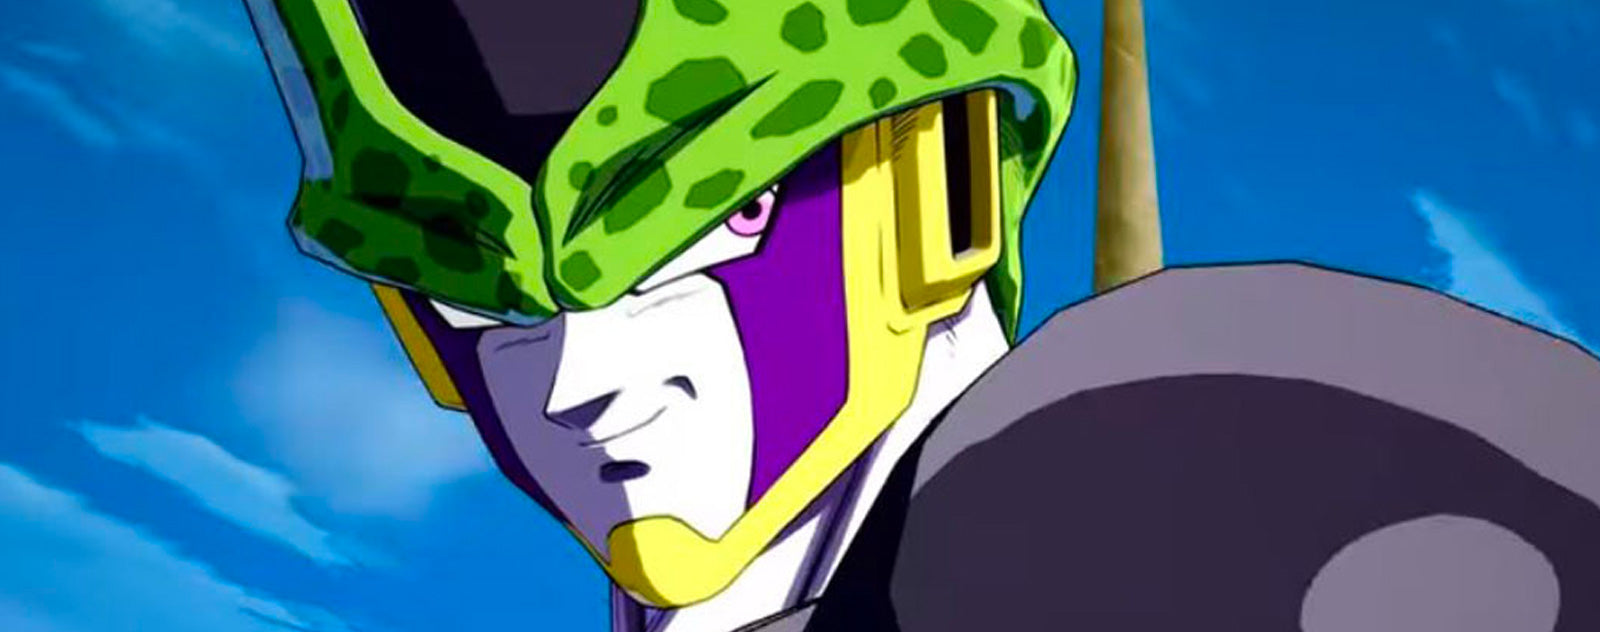 Cell Dragon Ball FighterZ